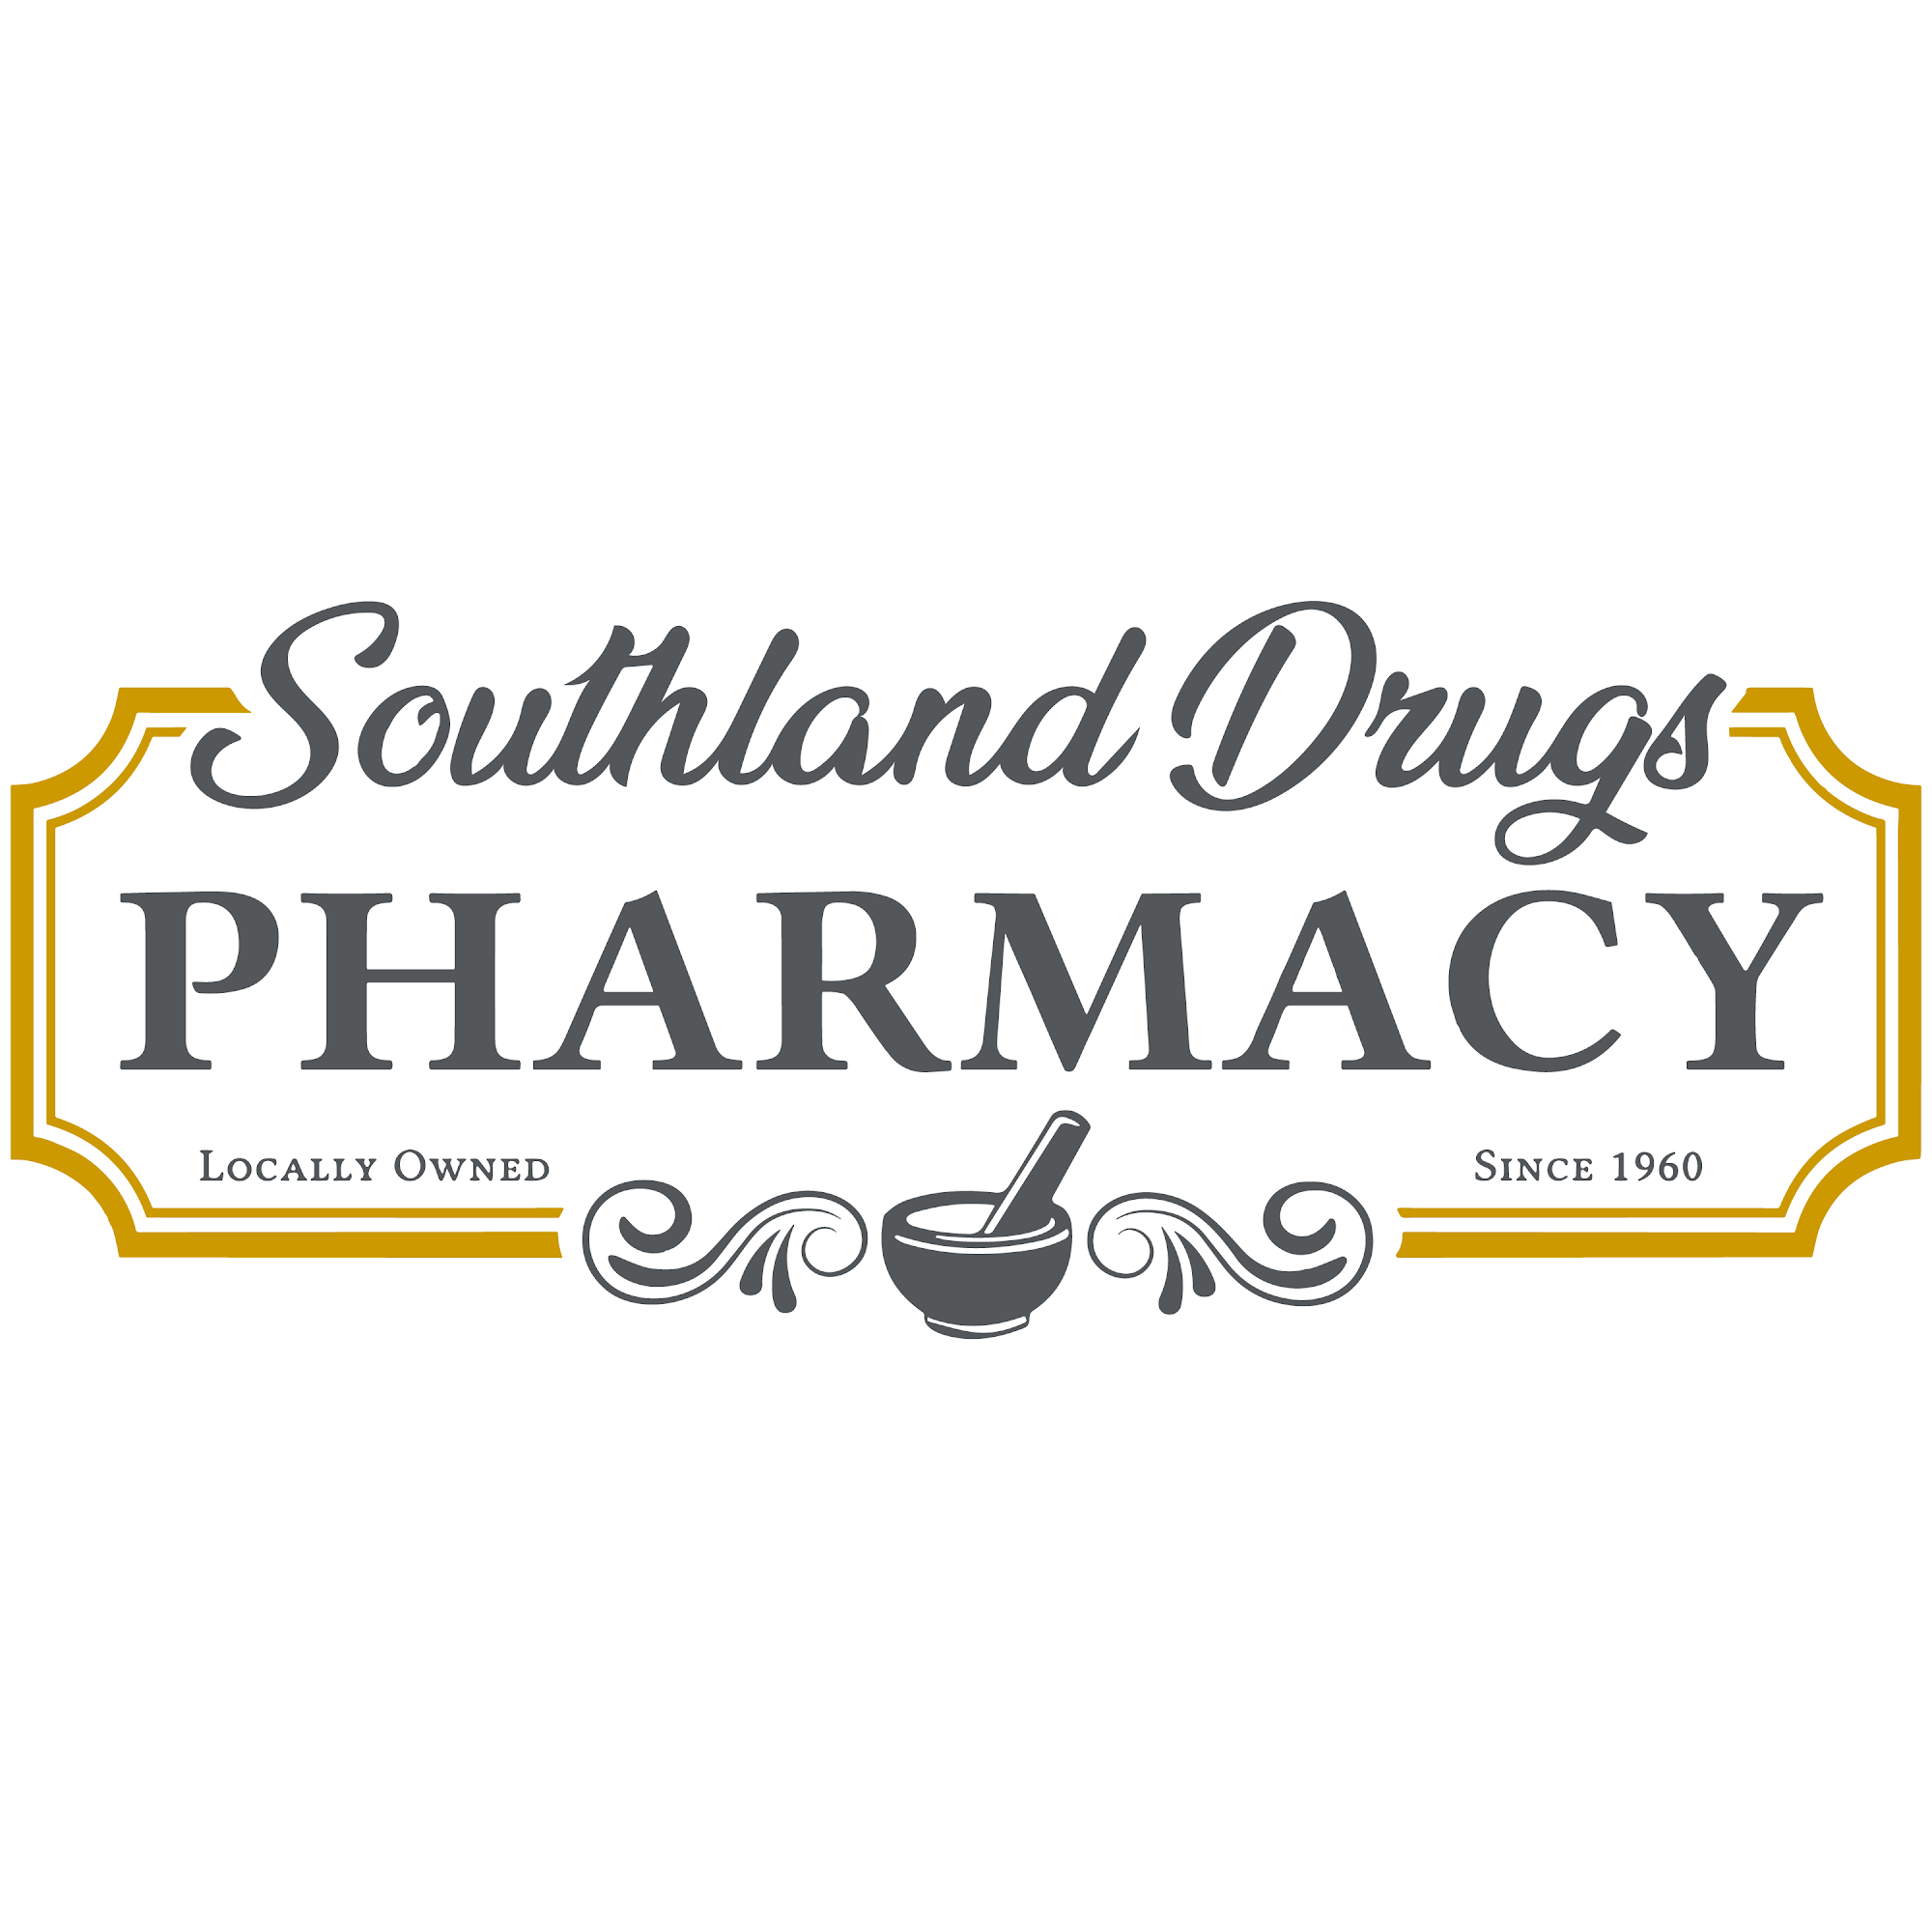 Southland Drugs